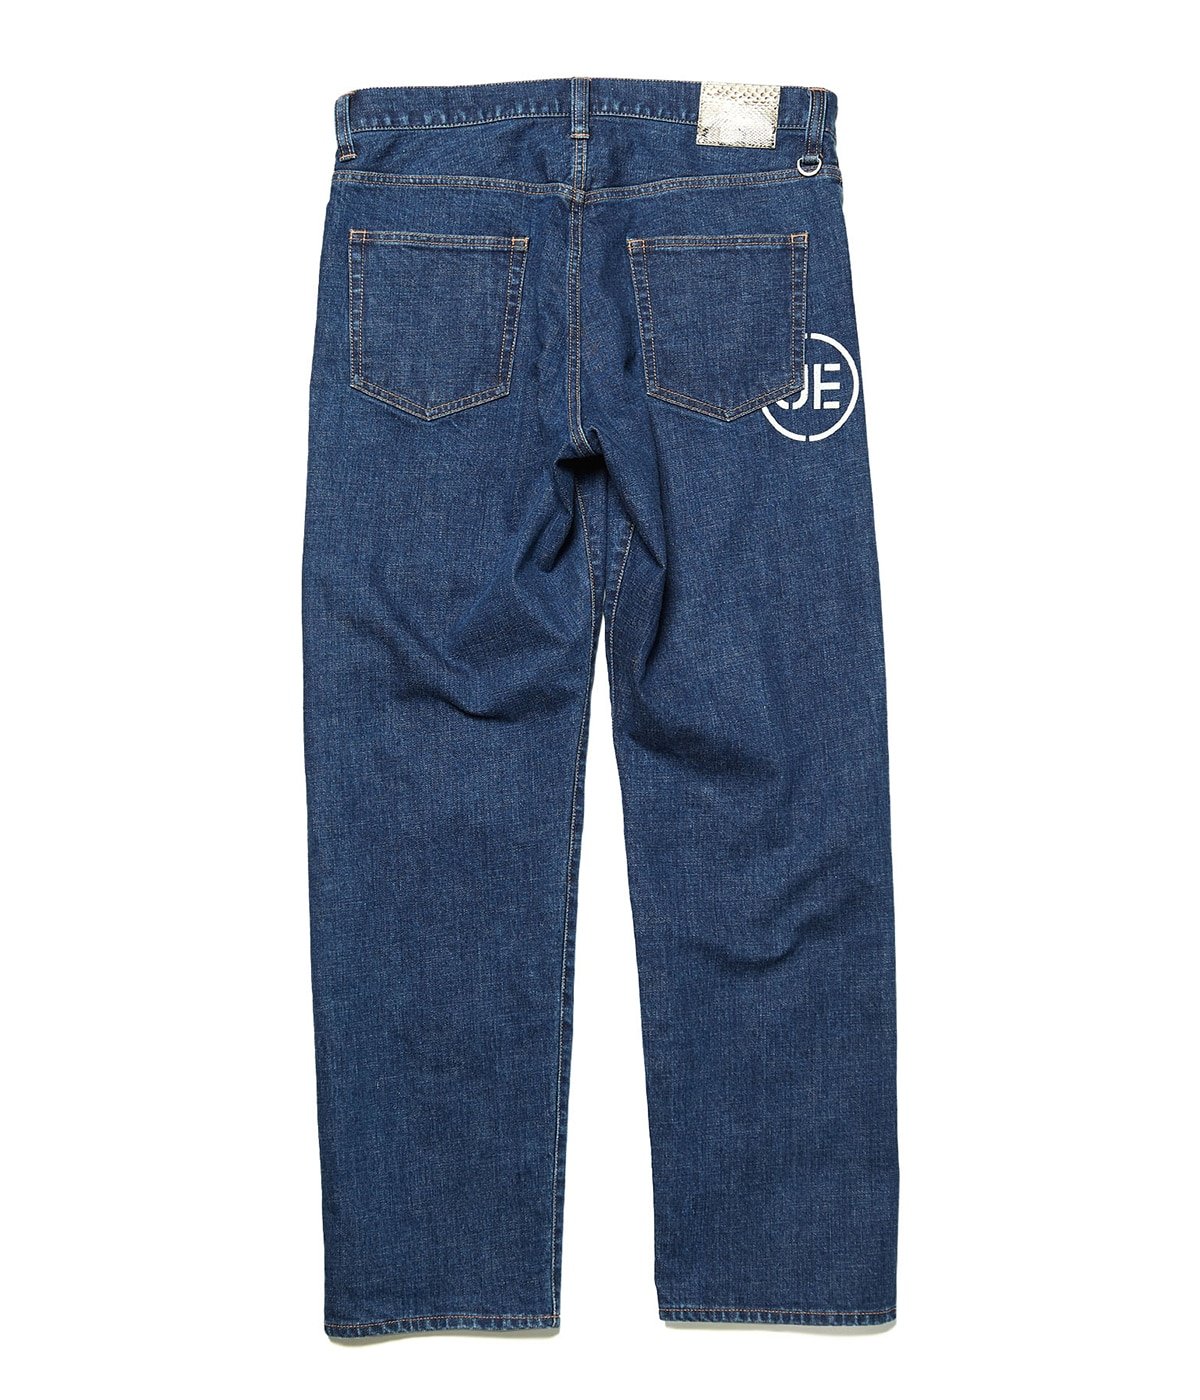 RELAX FIT WASHED DENIM PANTS